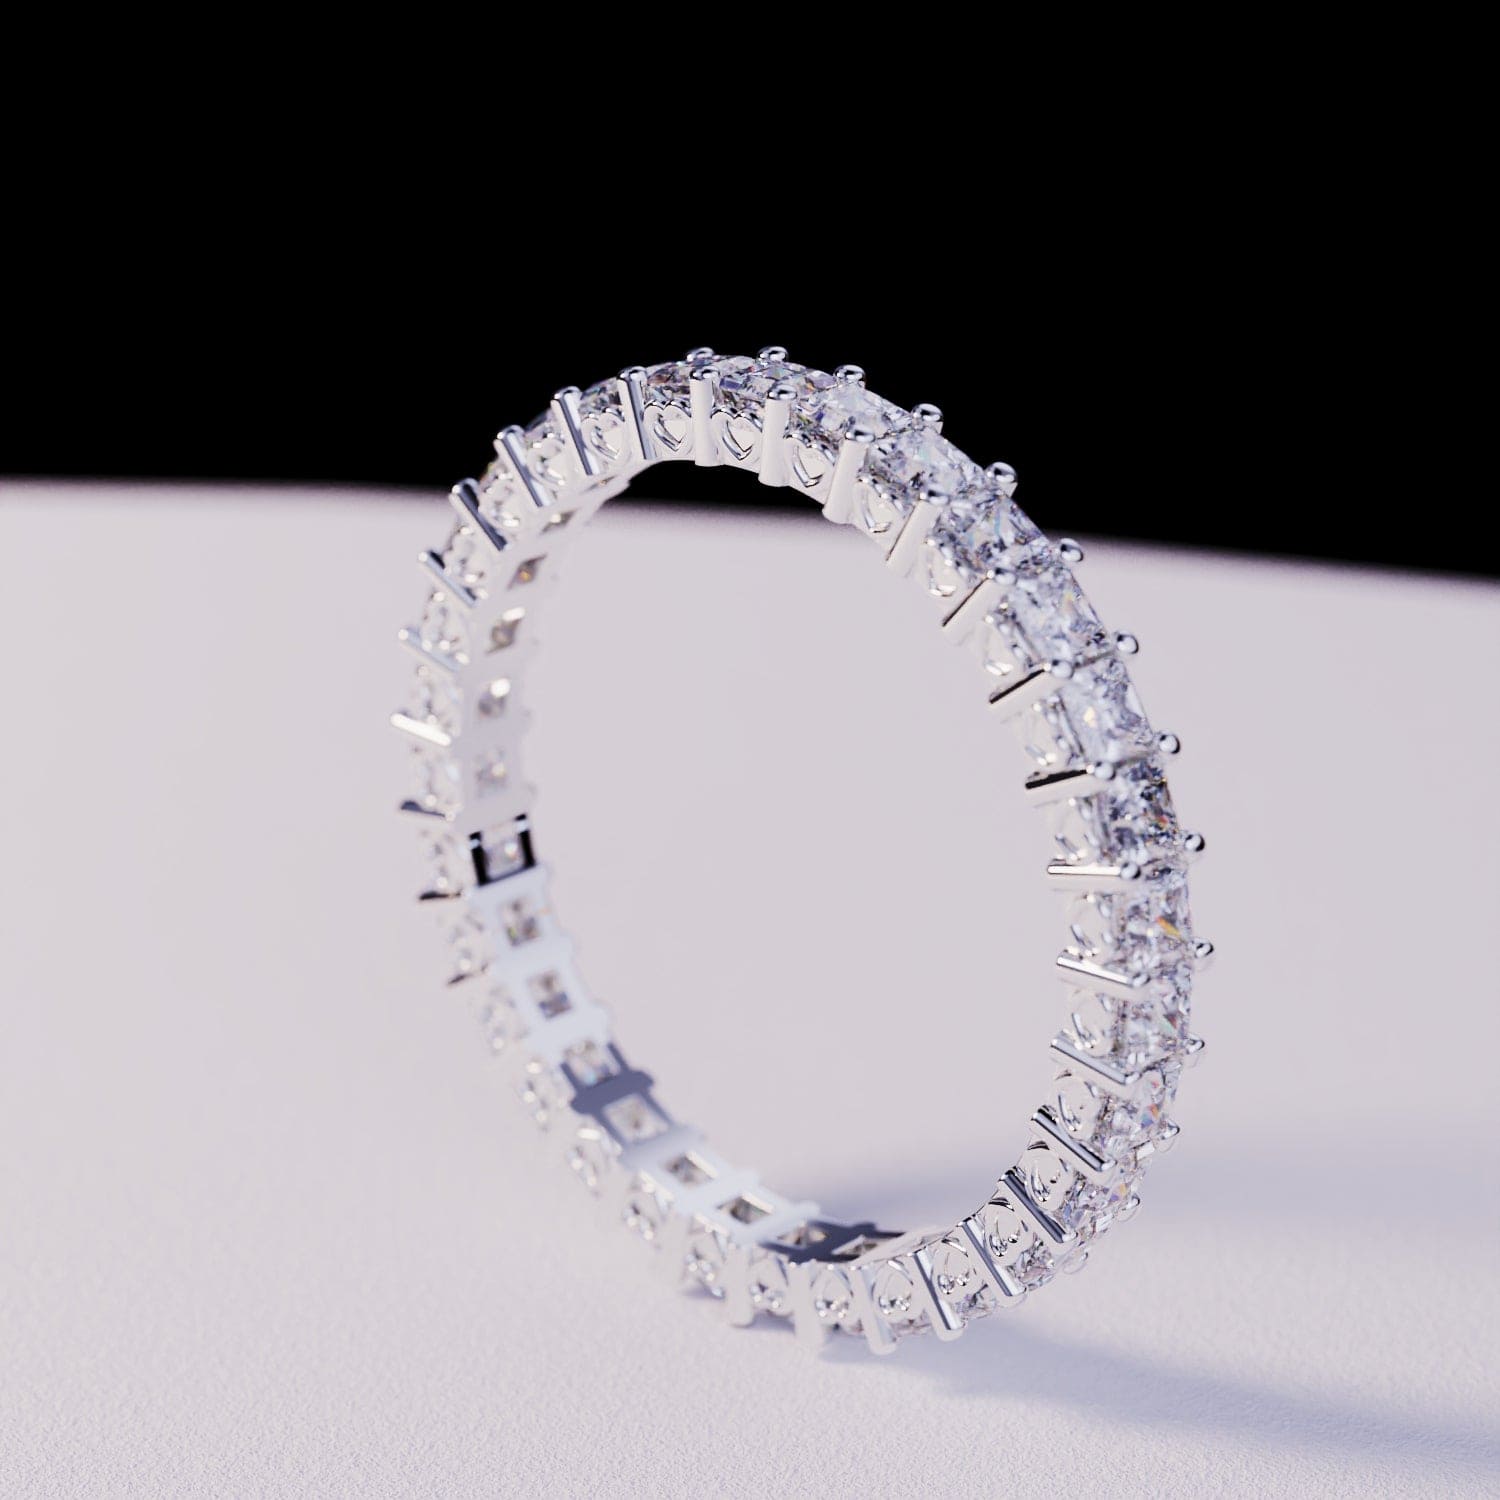 The Eternity: Channel Ring - S925 Sterling Silver